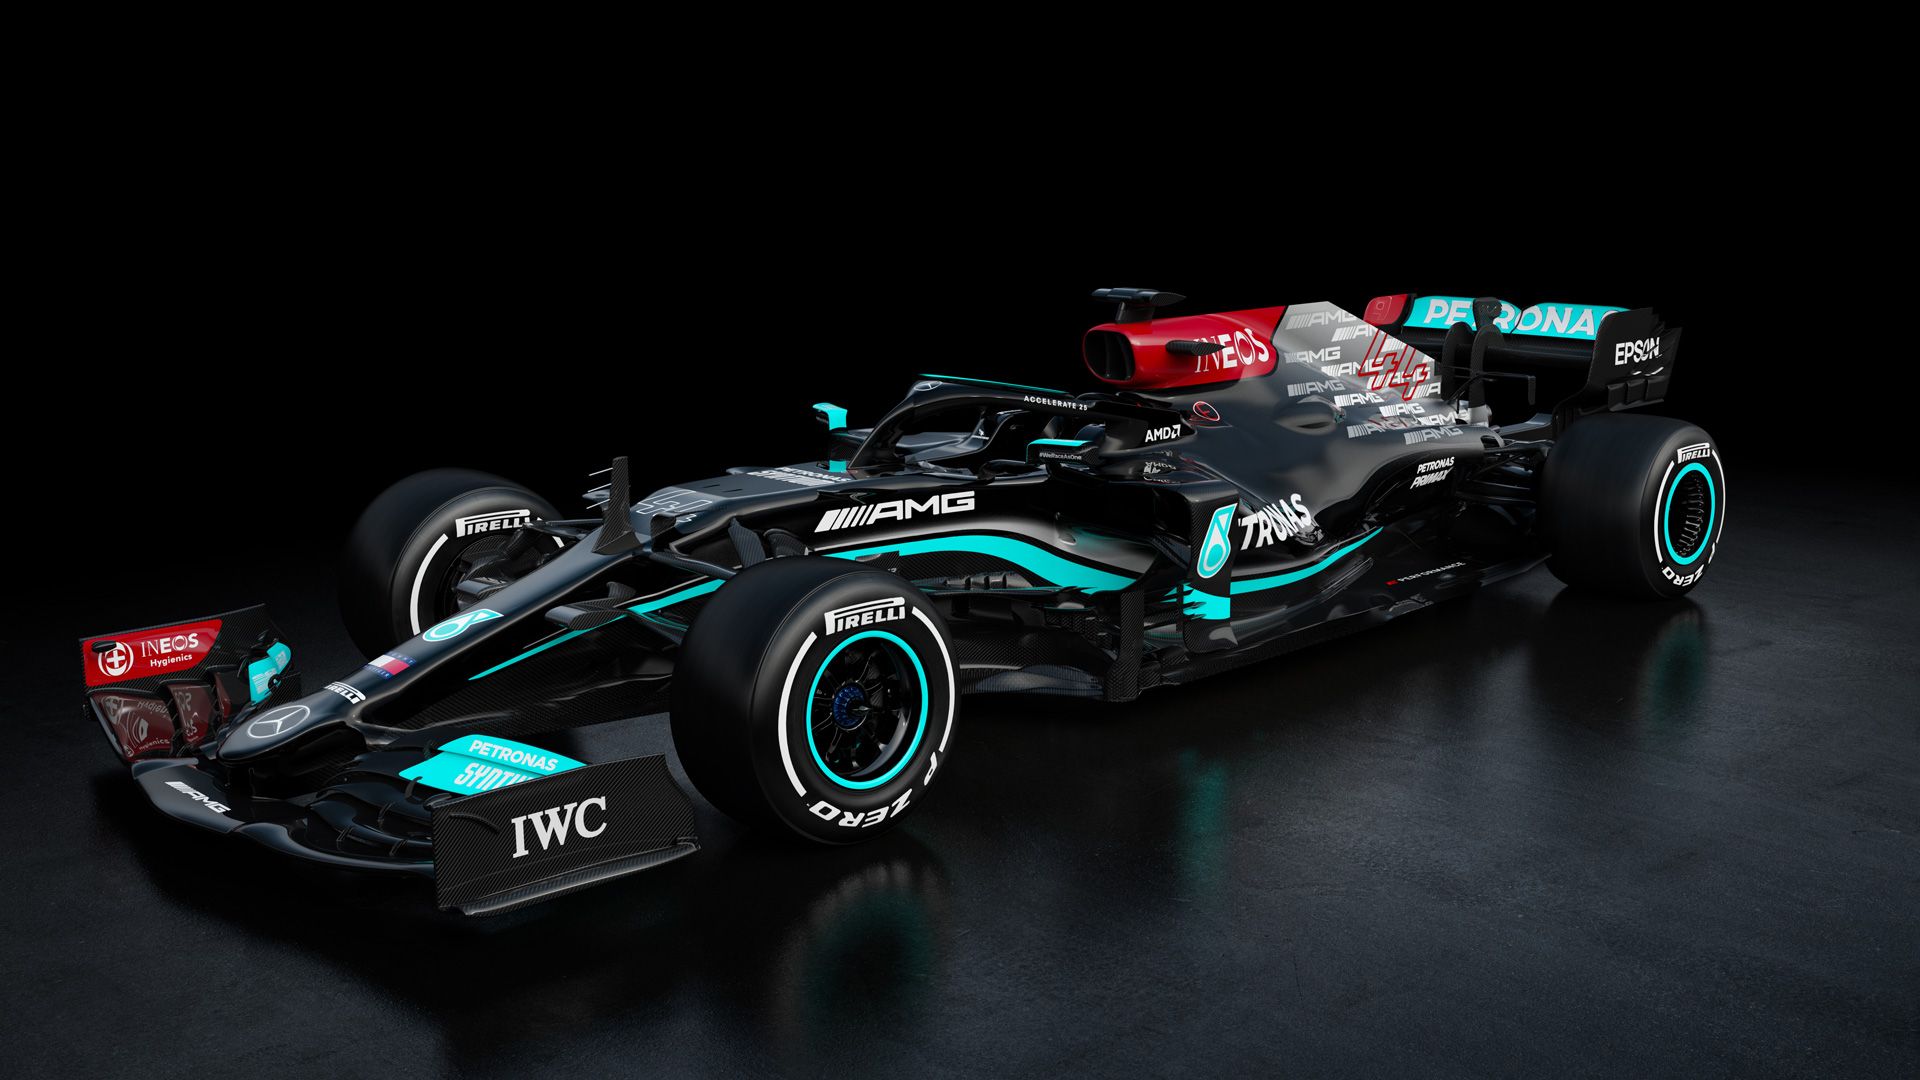 Mercedes retain black livery as they unveil Hamilton and Bottas' new F1 car for 2021. Formula 1®